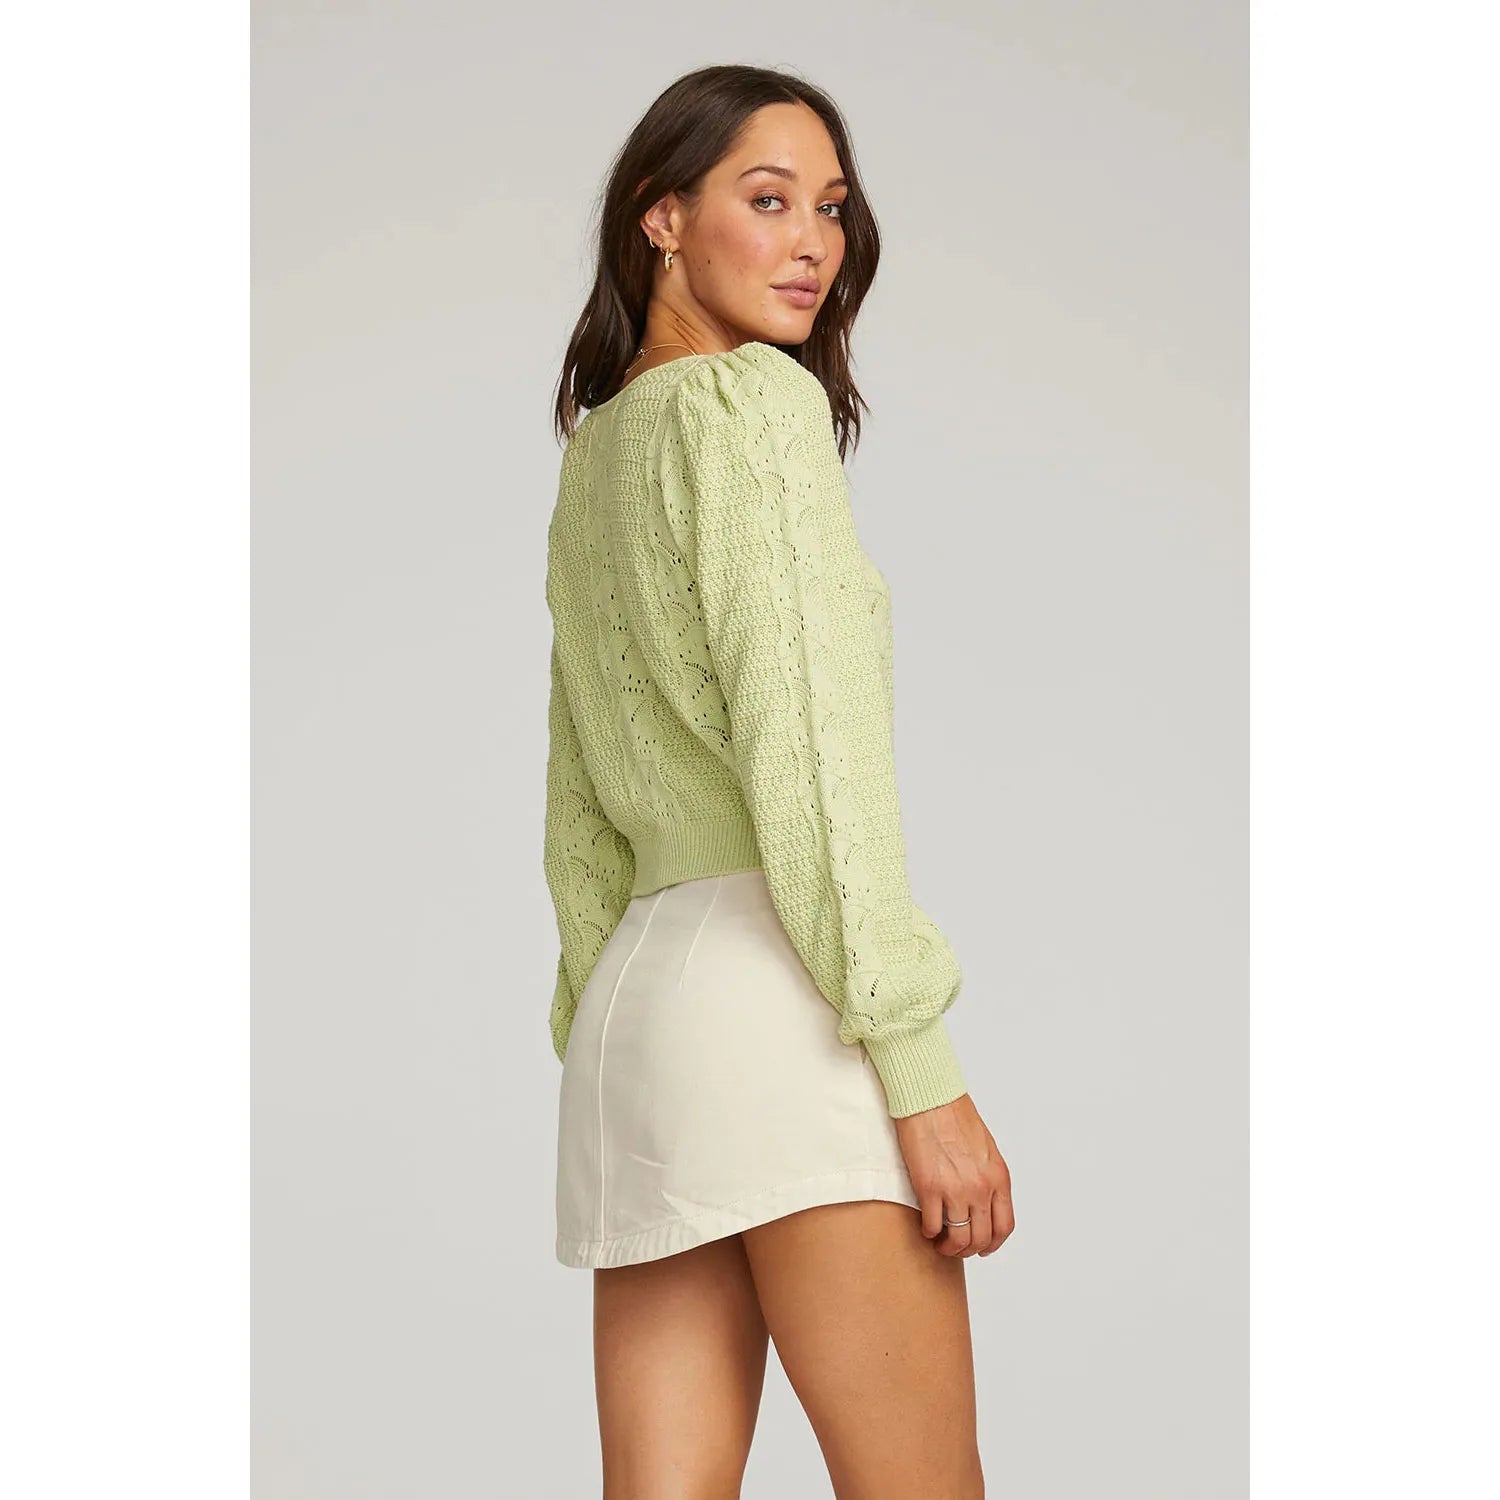 Saltwater Luxe - Karrinna Sweater in Limelight